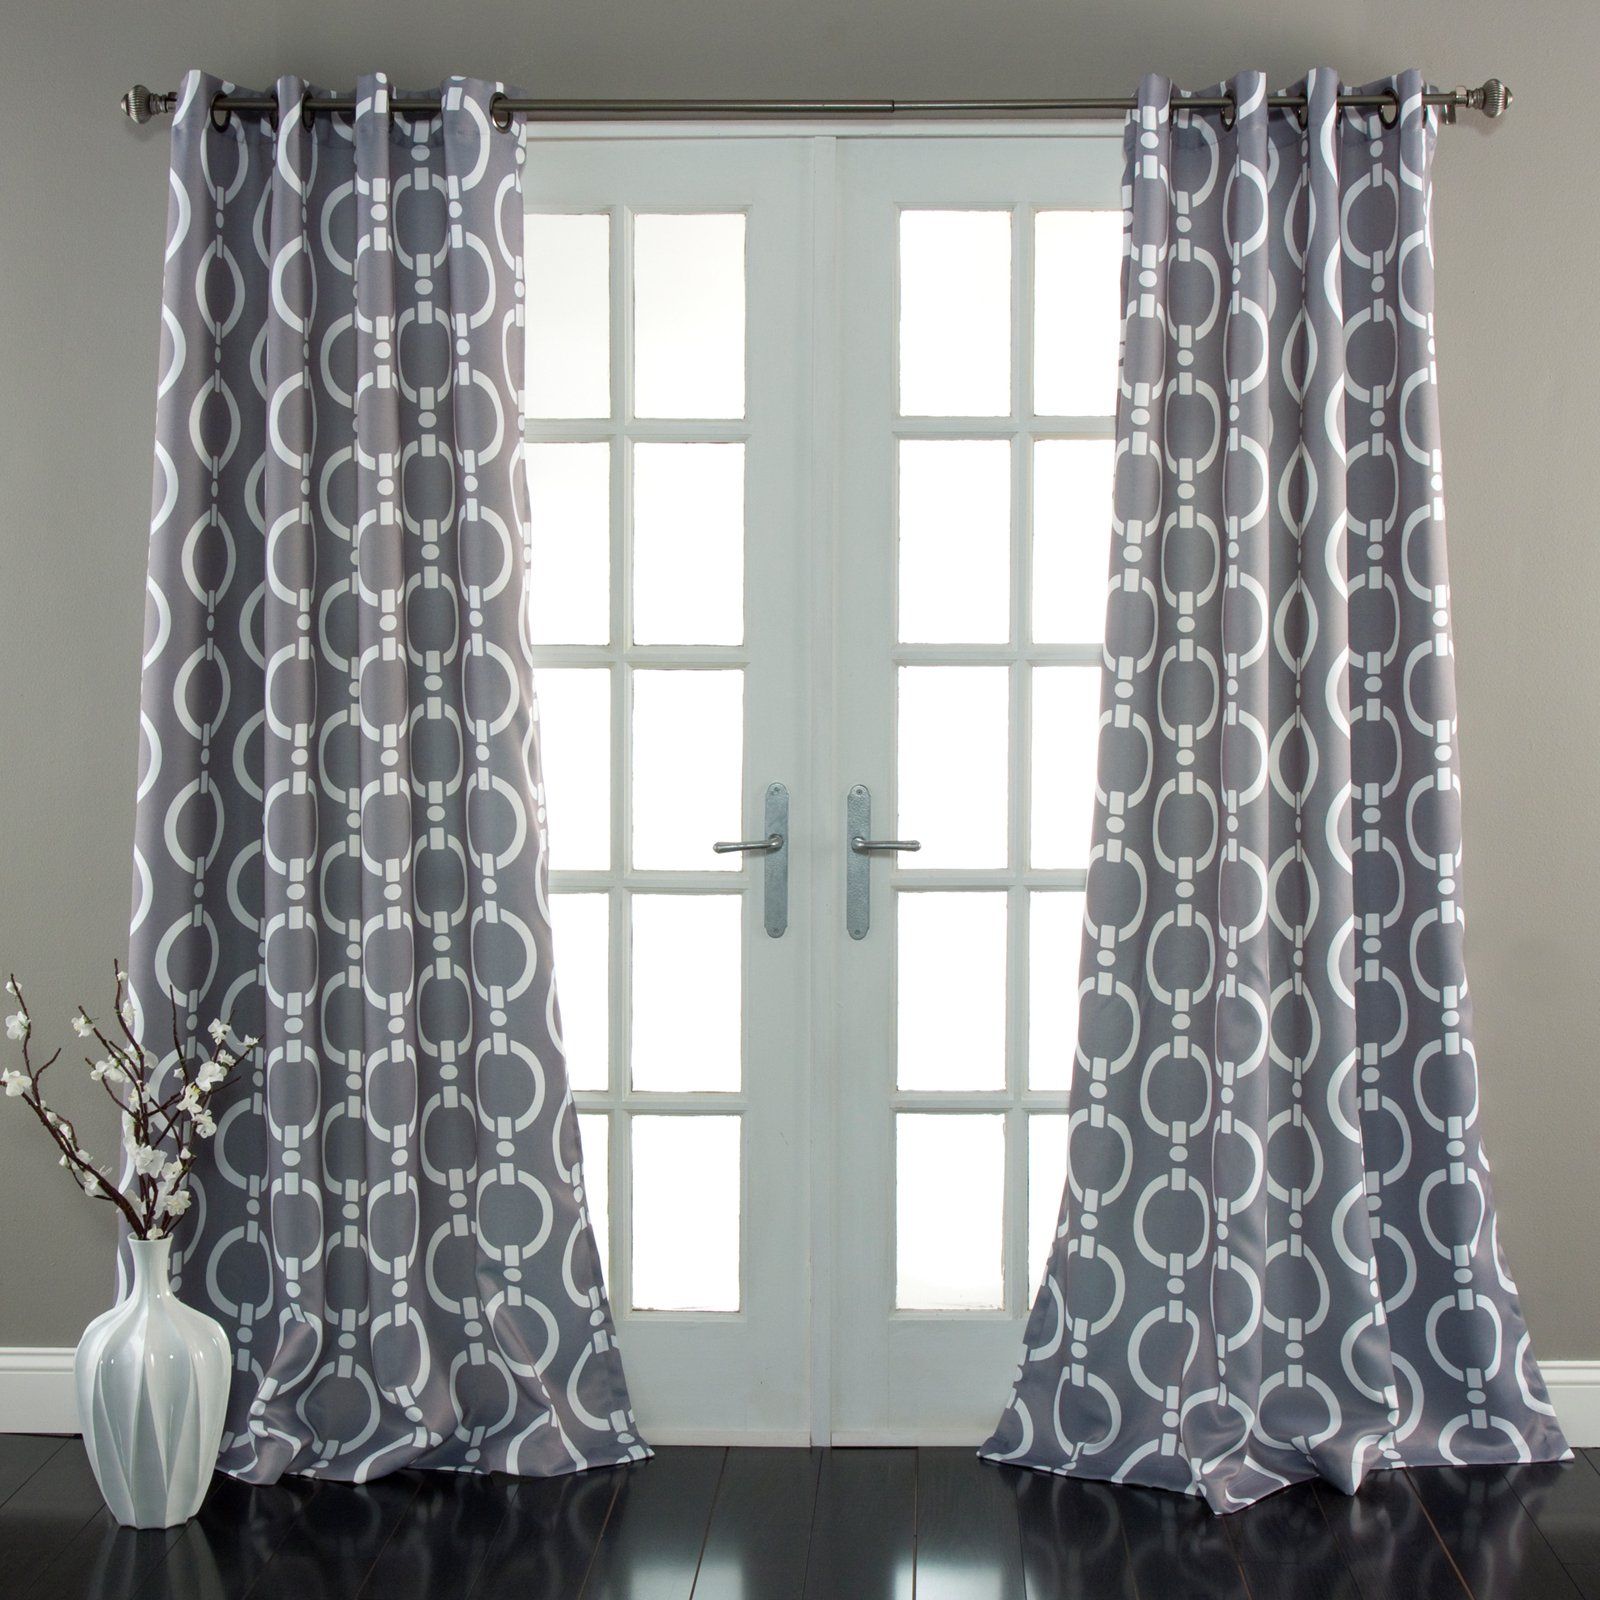 Room Temperature can be Control by using the Curtains